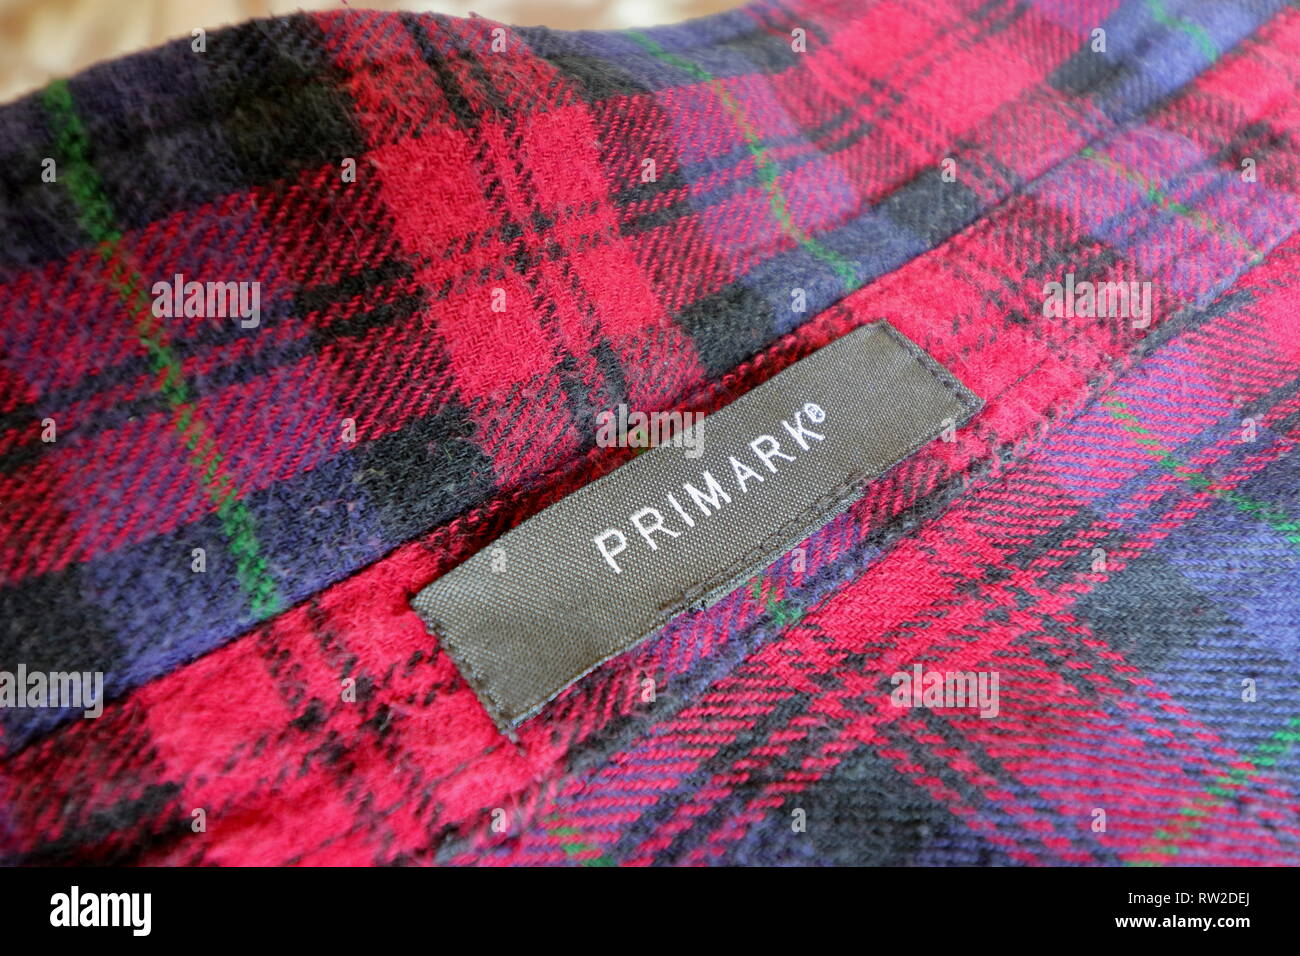 BRAUNSCHWEIG, LOWER SAXONY, GERMANY - MARCH 4, 2019: Fabric Primark tag. Primark textile label stitched on unisex shirt in Lumberjack design. Stock Photo